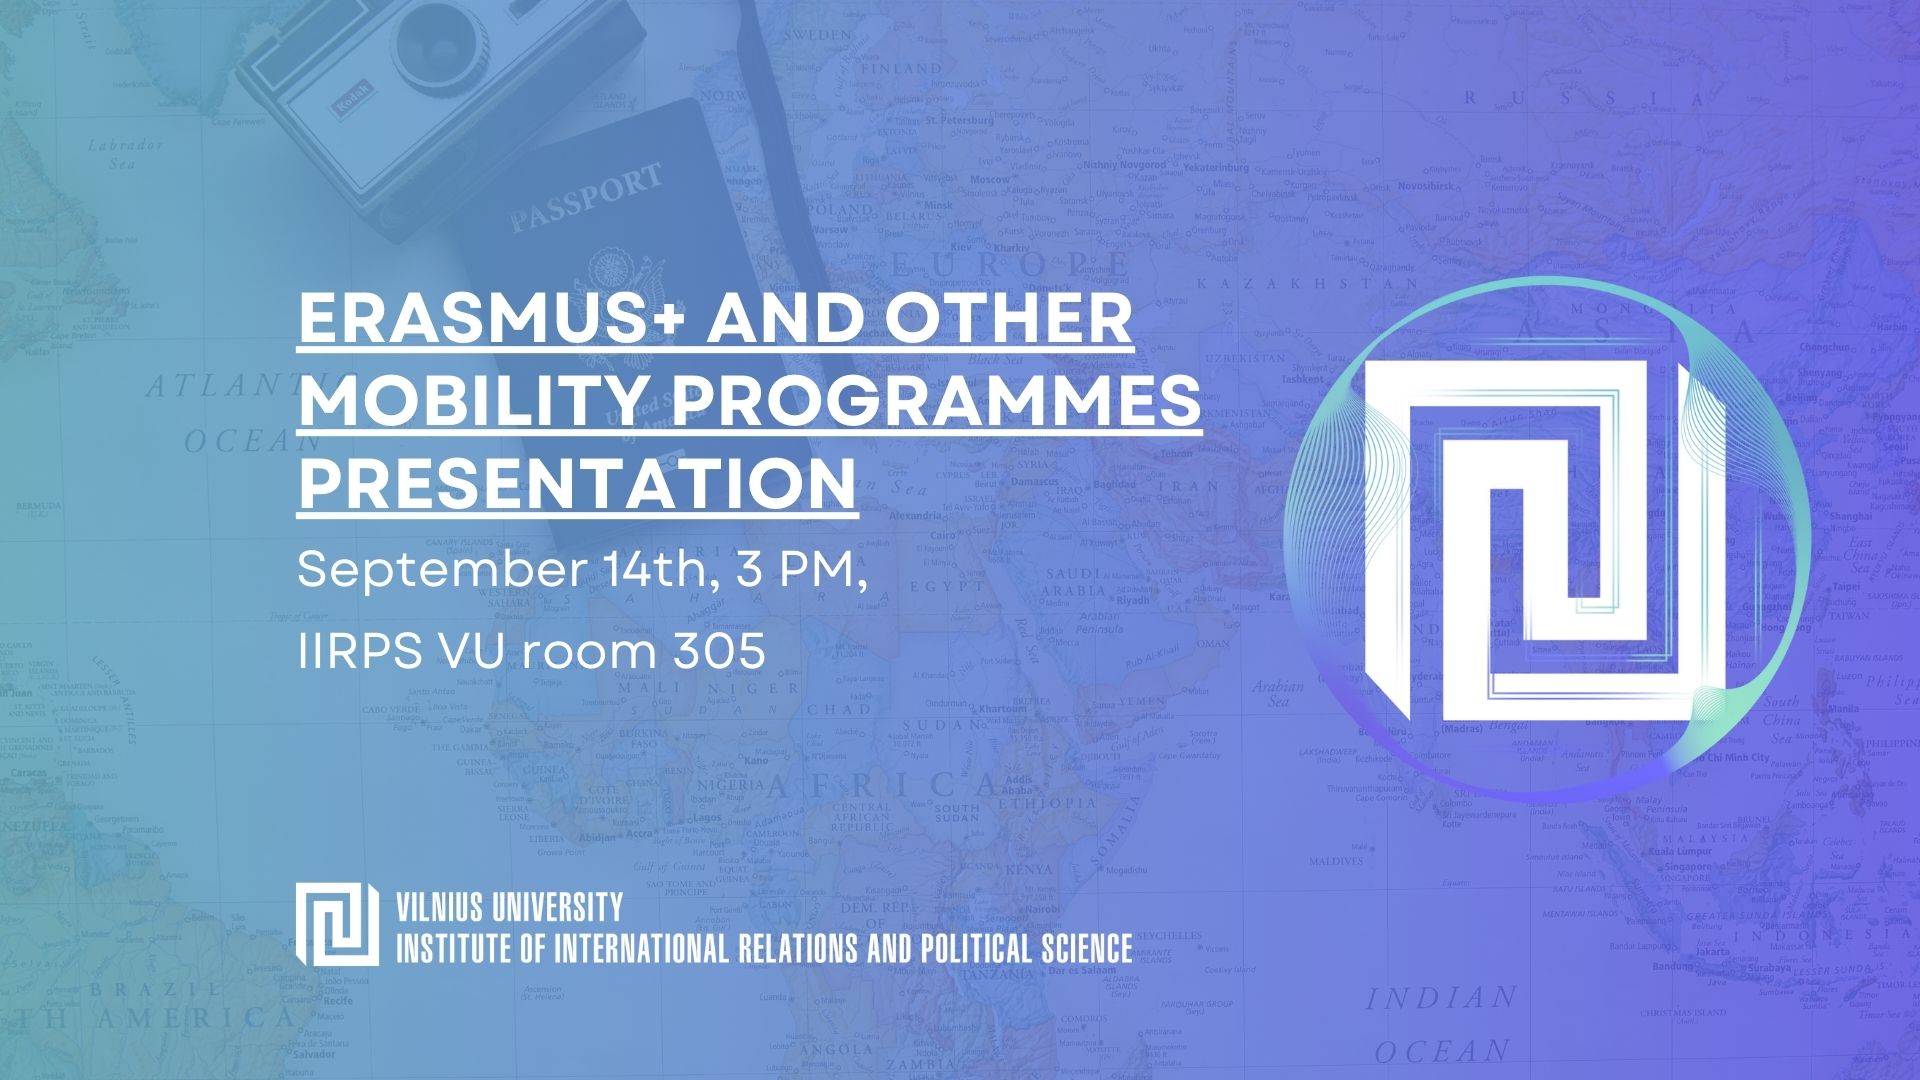 Erasmus+ and other mobility programmes presentation